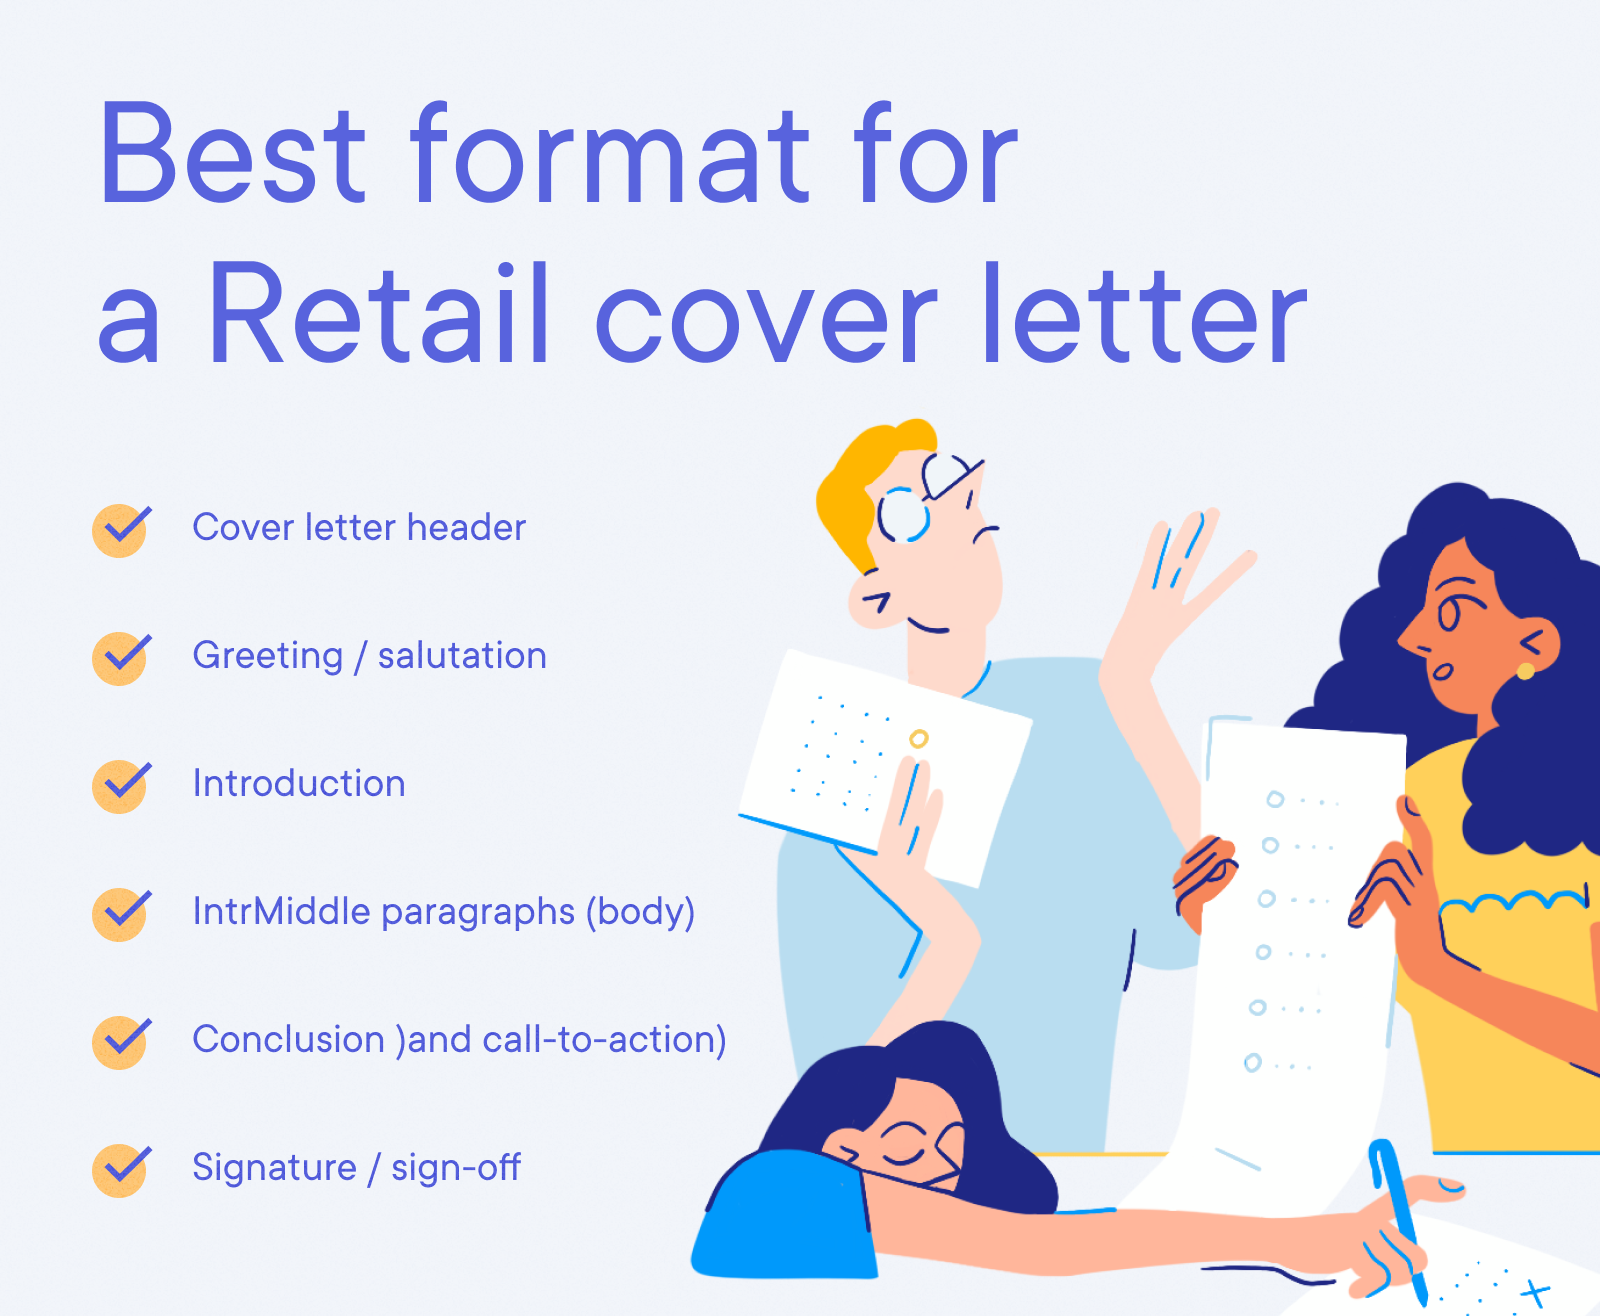 Retail Cover Letter Example - Best format for a Retail cover letter